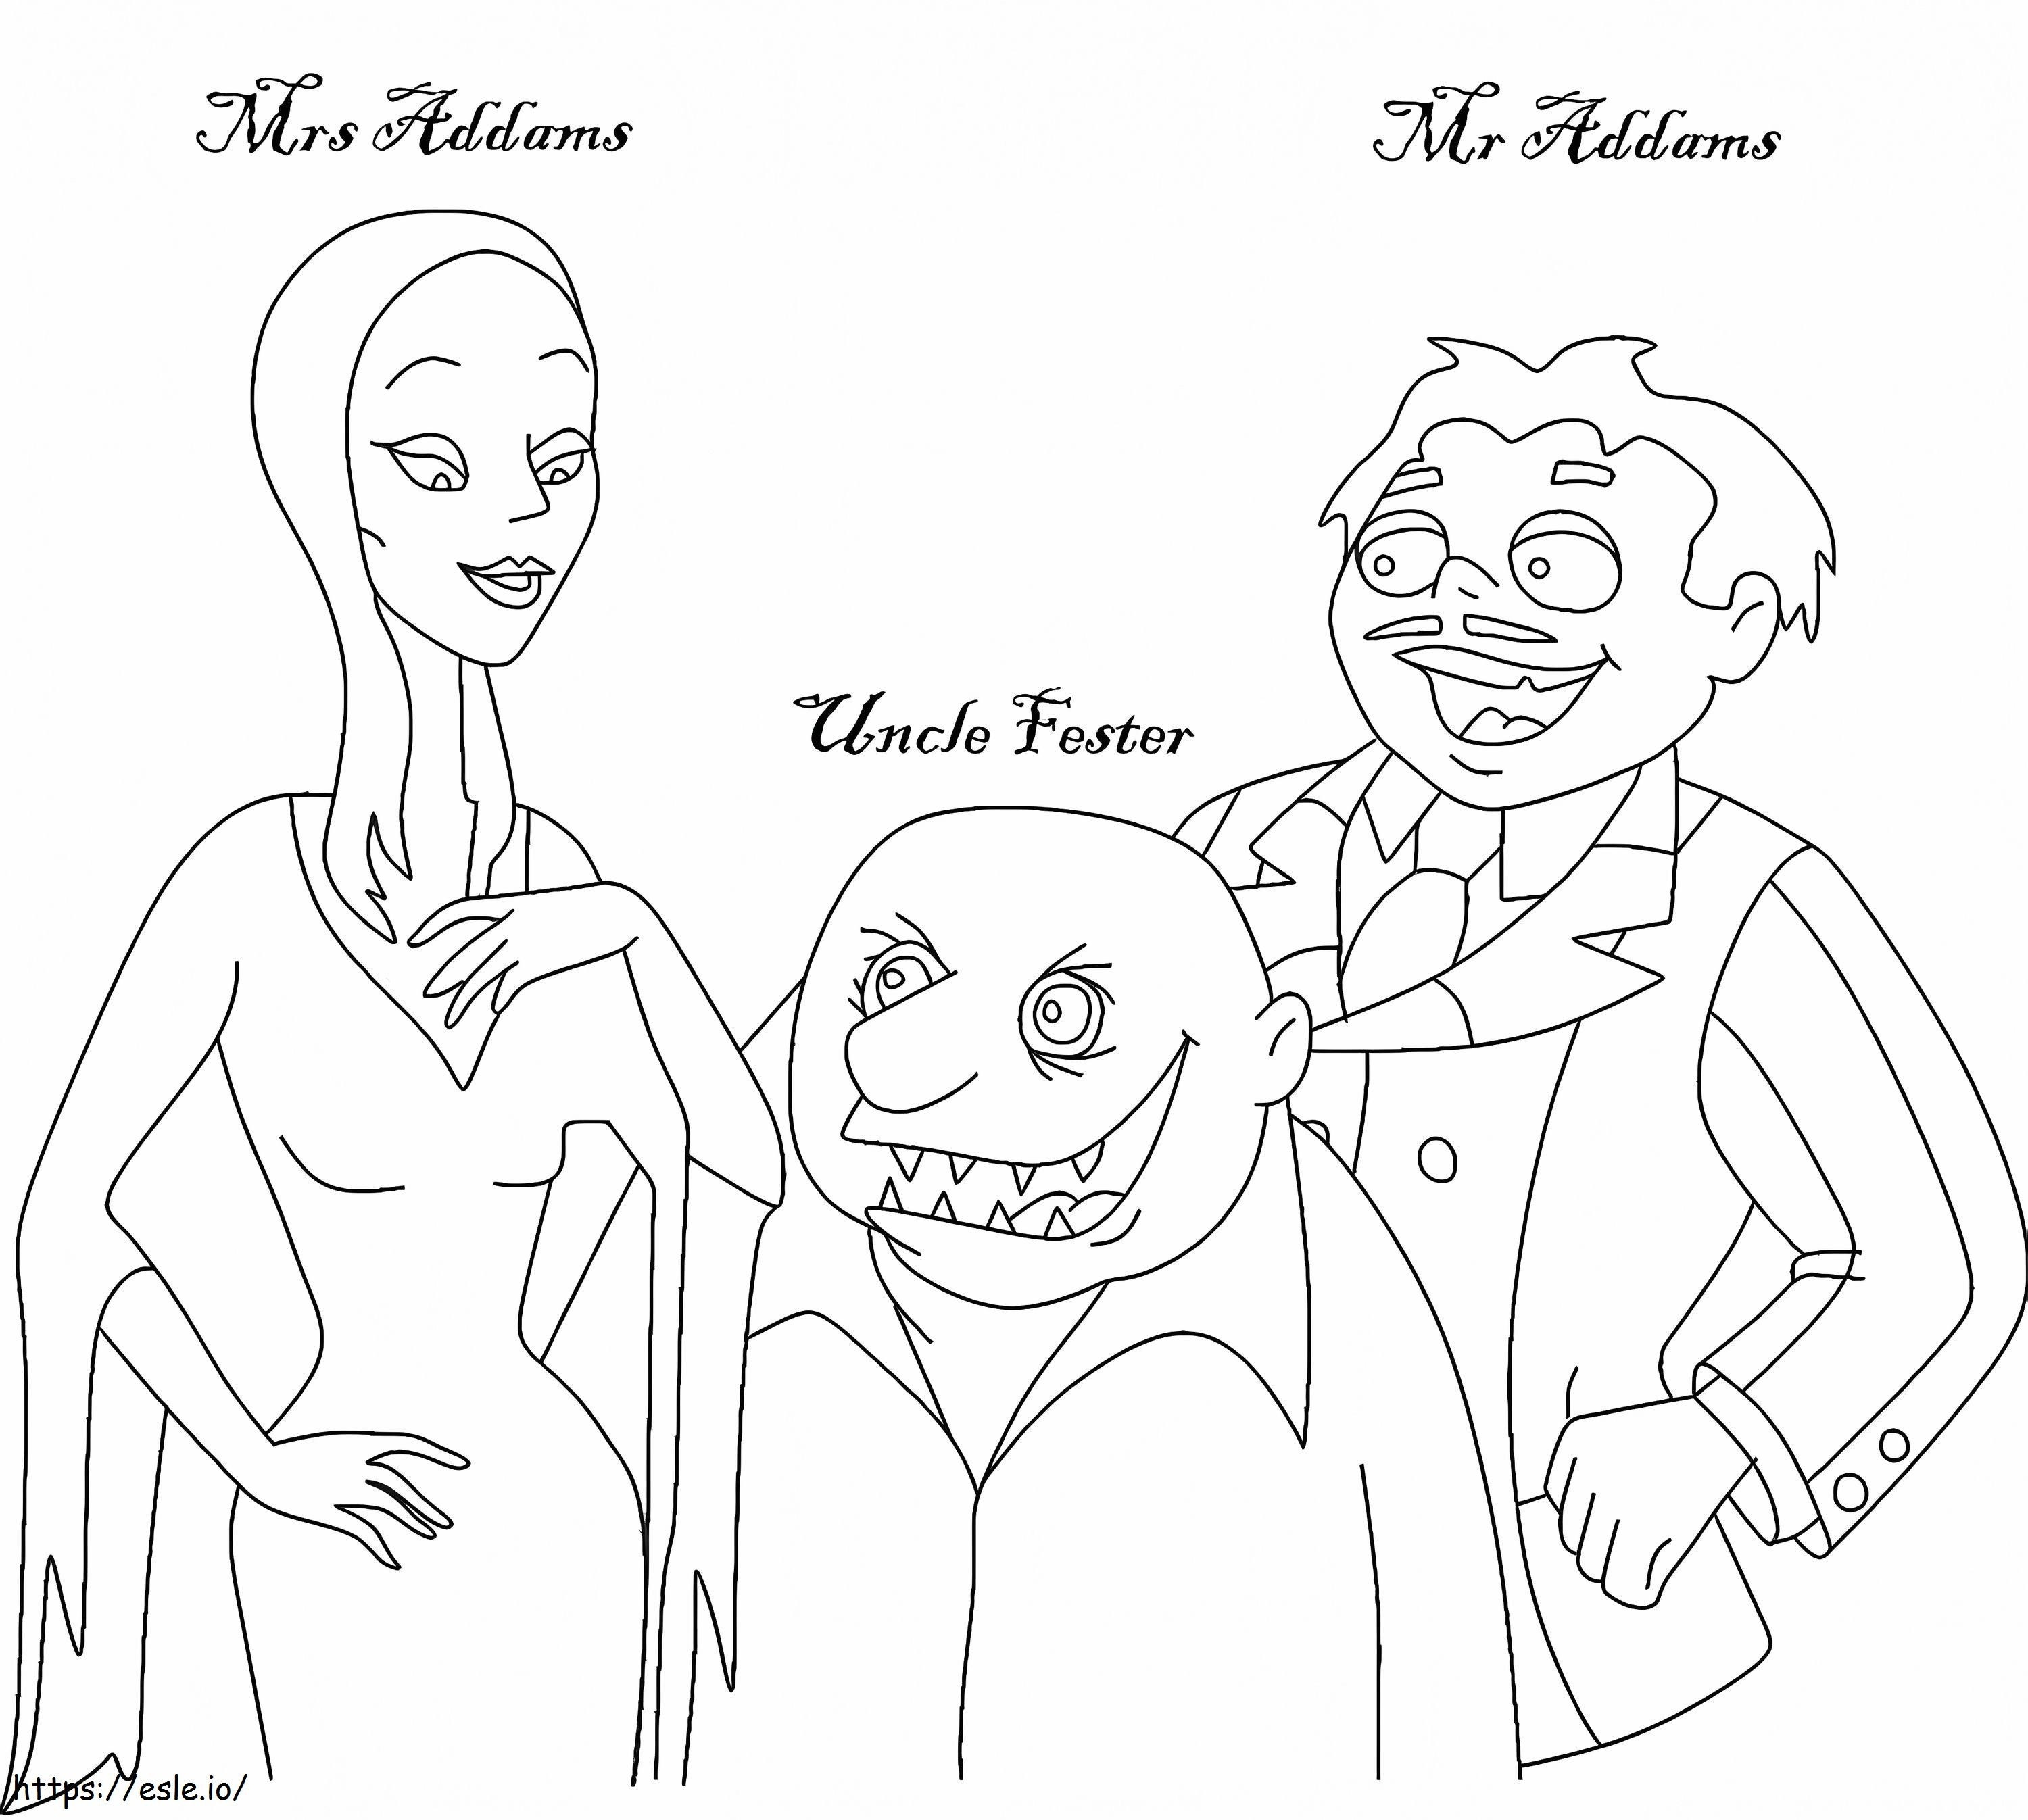 Free The Addams Family Printable coloring page